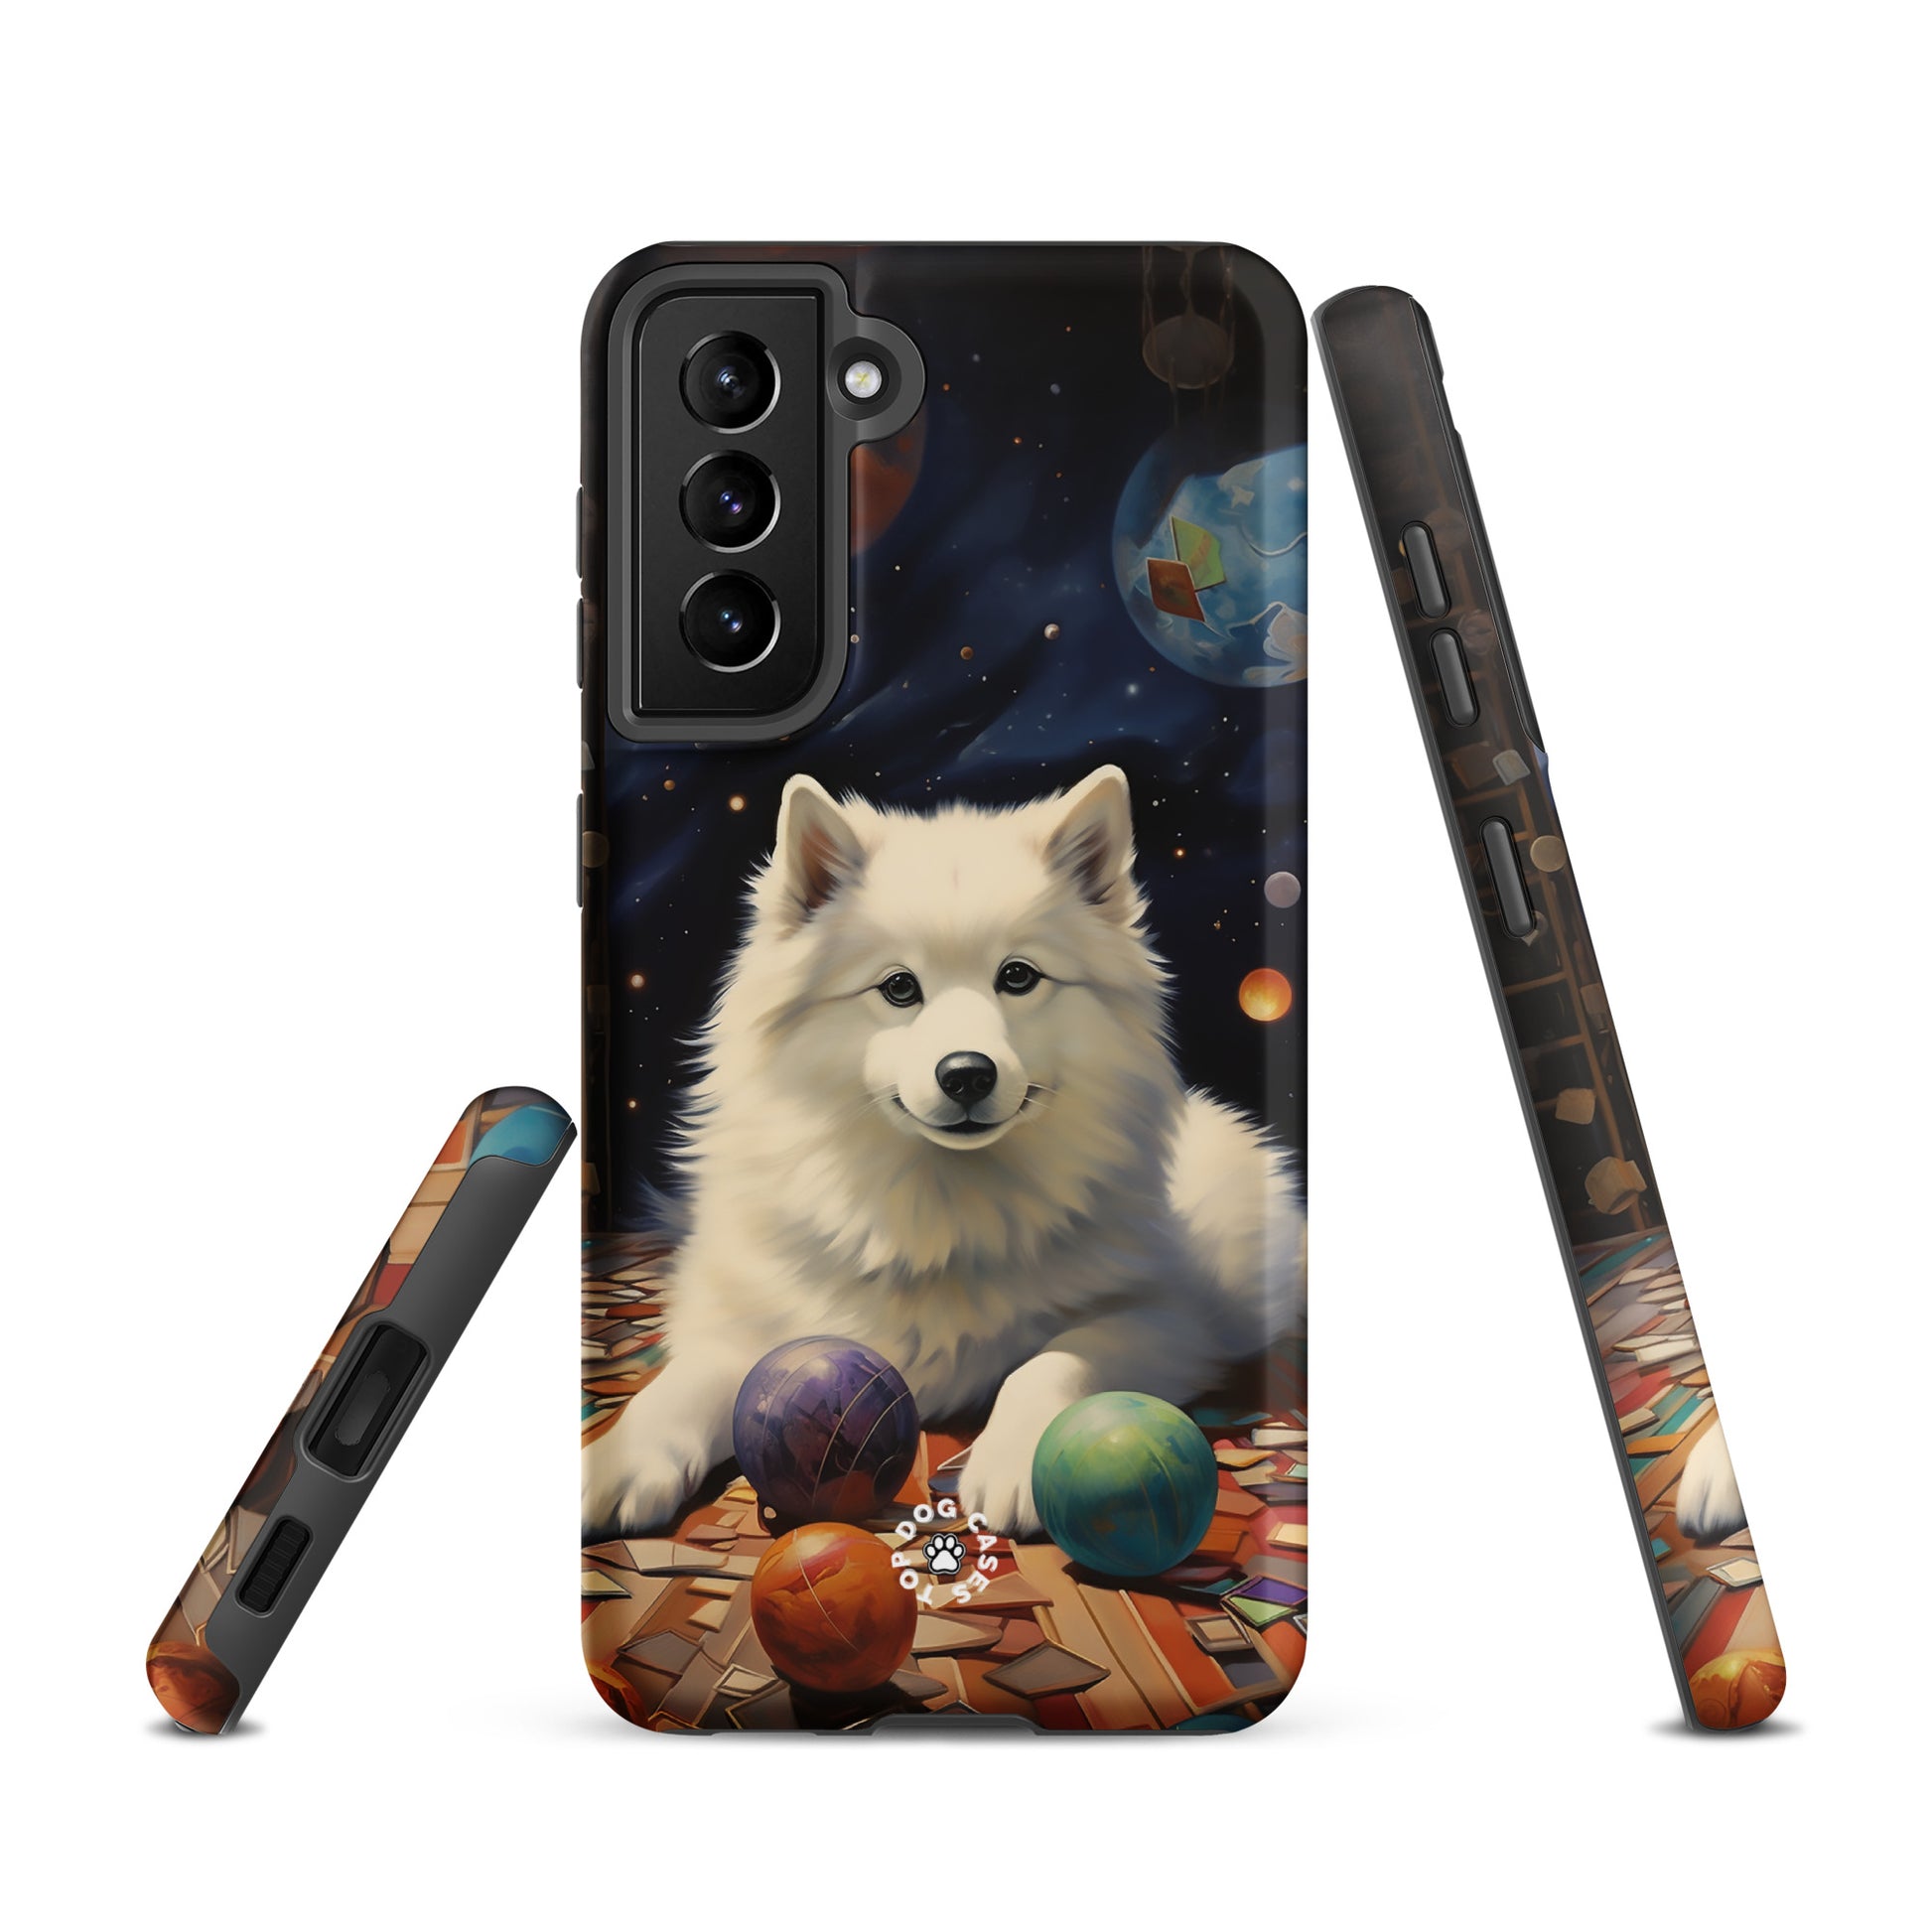 Relaxed White Siberian Husky Galaxy Edition Tough Case for Samsung - Top Dog Cases - #CuteDog, #CuteDogs, #DogInSpace, #DogPhoneCase, #Samsung, #SamsungGalaxy, #SamsungGalaxyCase, #SamsungGalaxyS10, #SamsungGalaxyS20, #SamsungGalaxyS21, #SamsungGalaxyS22, #SamsungGalaxyS22Ultra, #SamsungGalaxyS23, #SamsungGalaxyS23Plus, #SamsungGalaxyS23Ultra, #SamsungPhoneCase, #Siberian Husky, #SiberianHusky, #White Siberian Husky, #WhiteHusky, #WhiteSiberianHusky, SamsungGalaxyS20Plus, SamsungGalaxyS22Plus